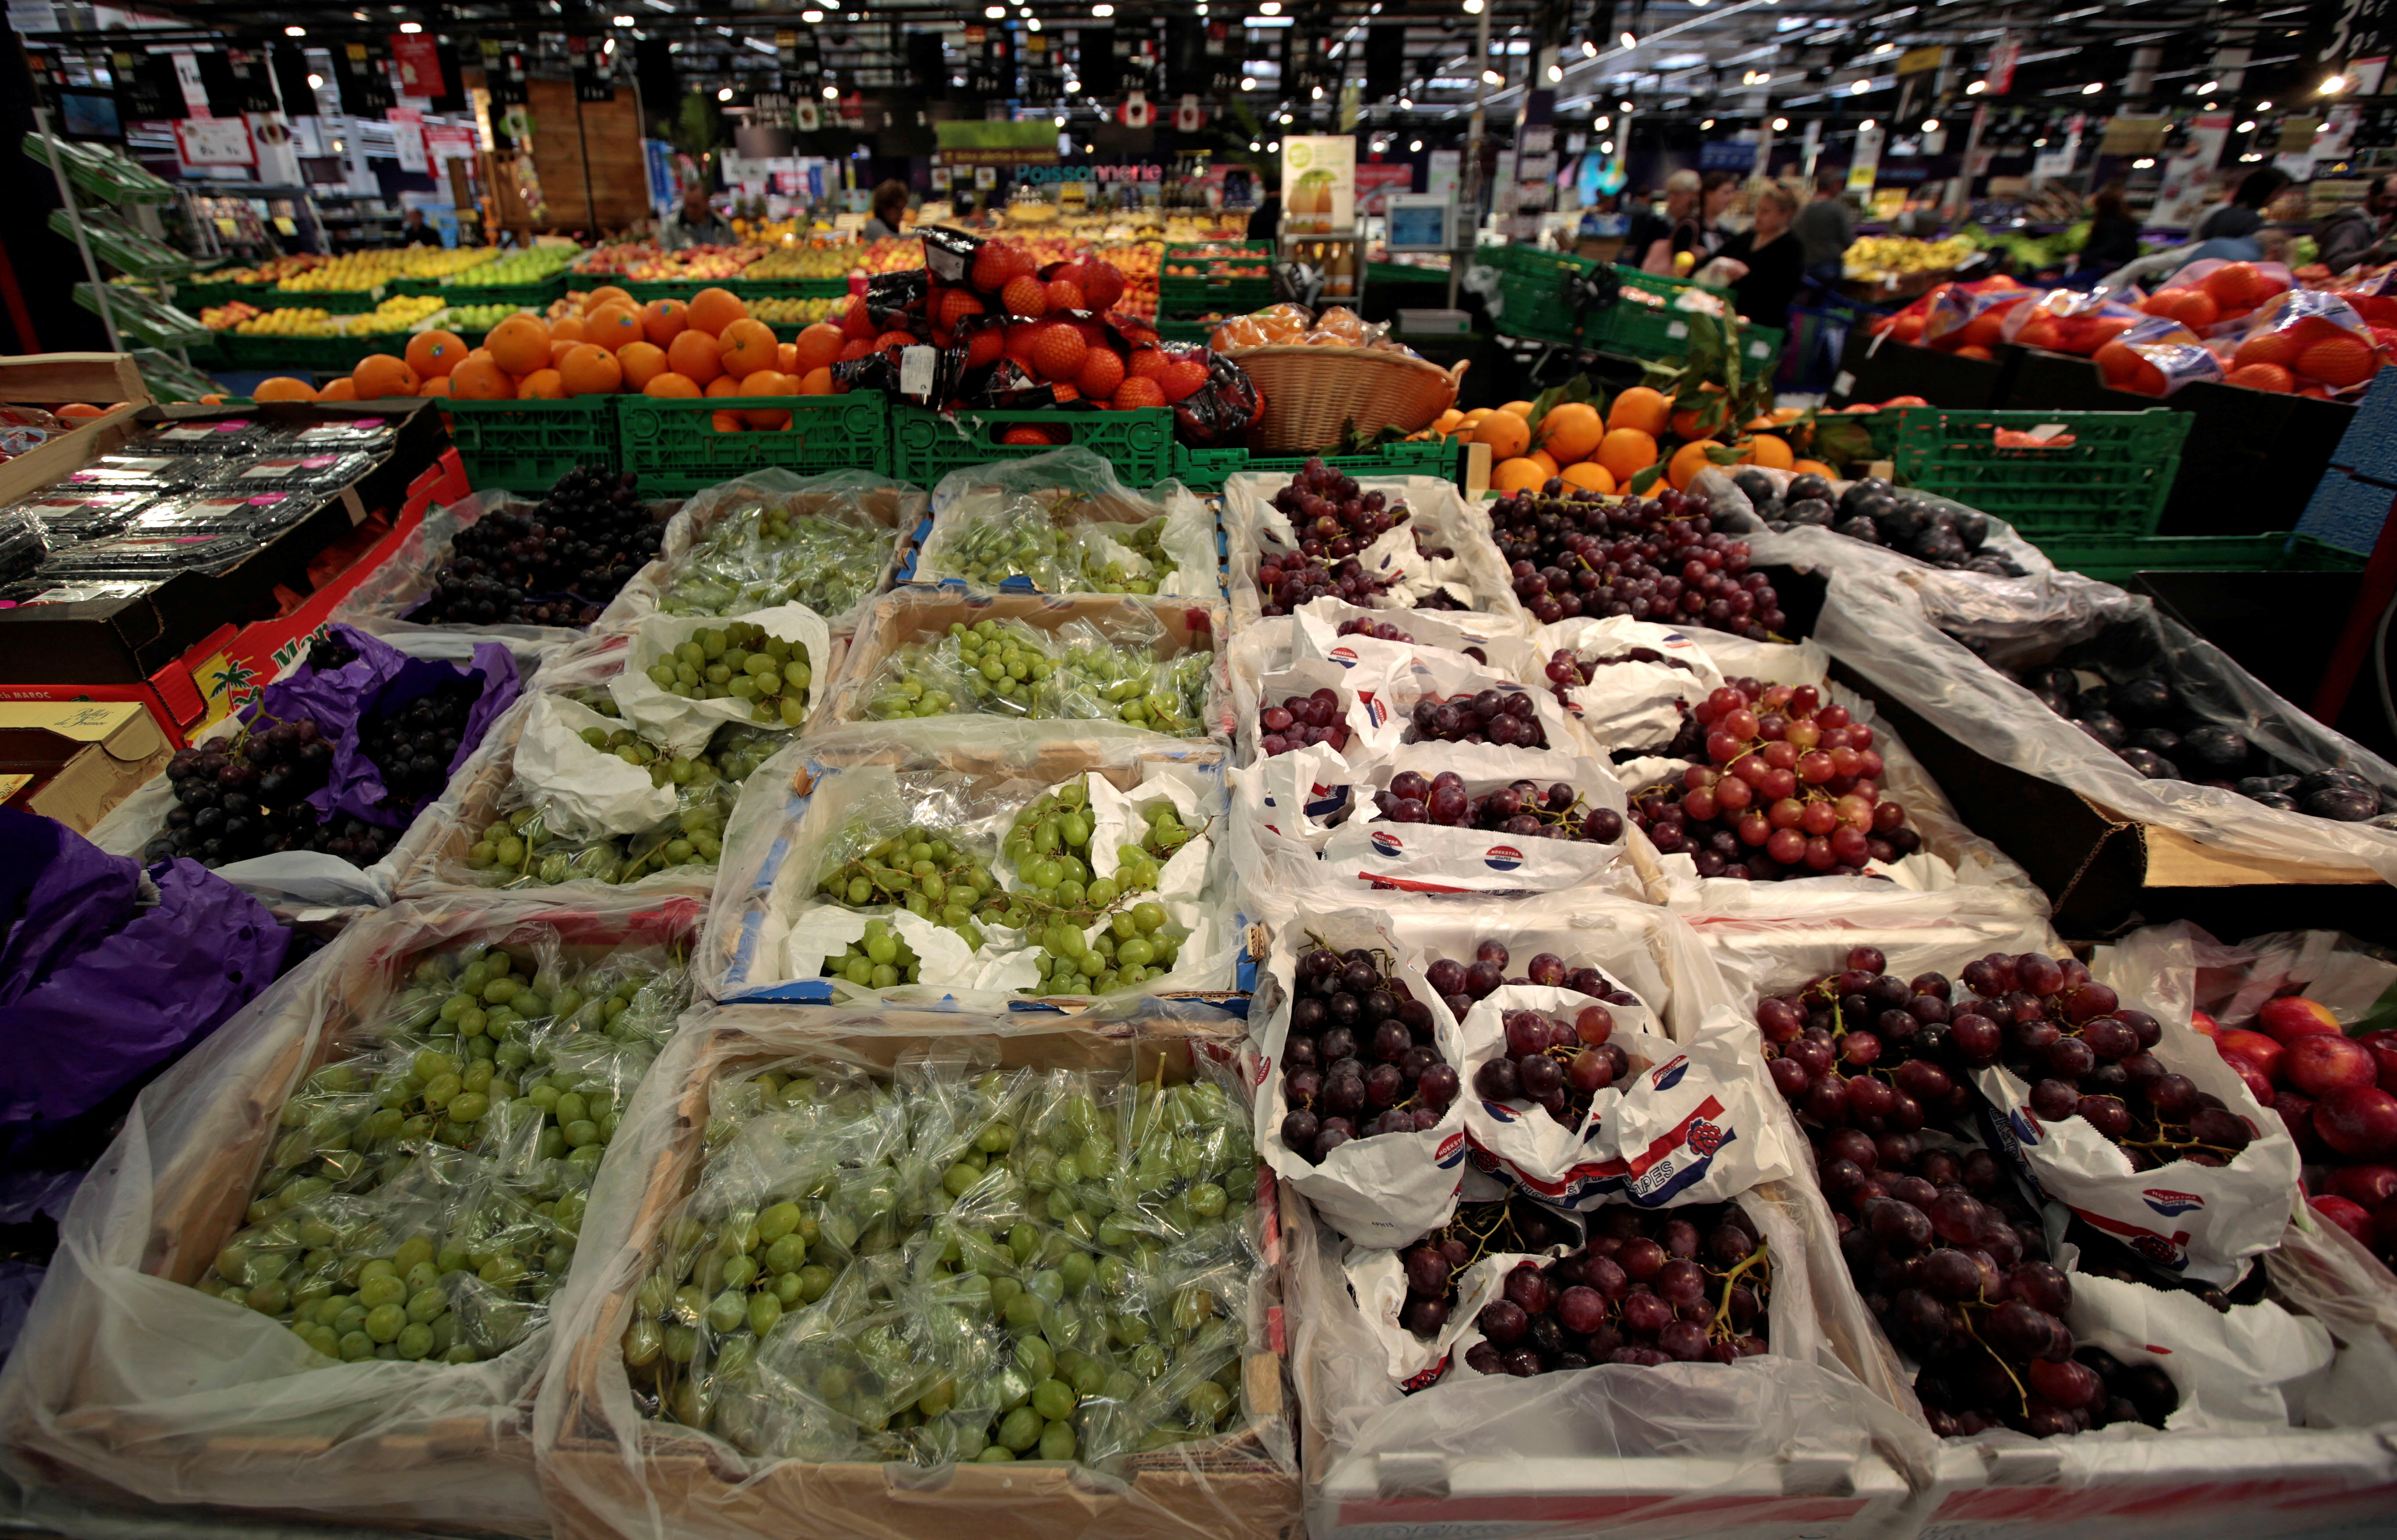 The fruit section is seen at a Carrefour hypermarket in Nice